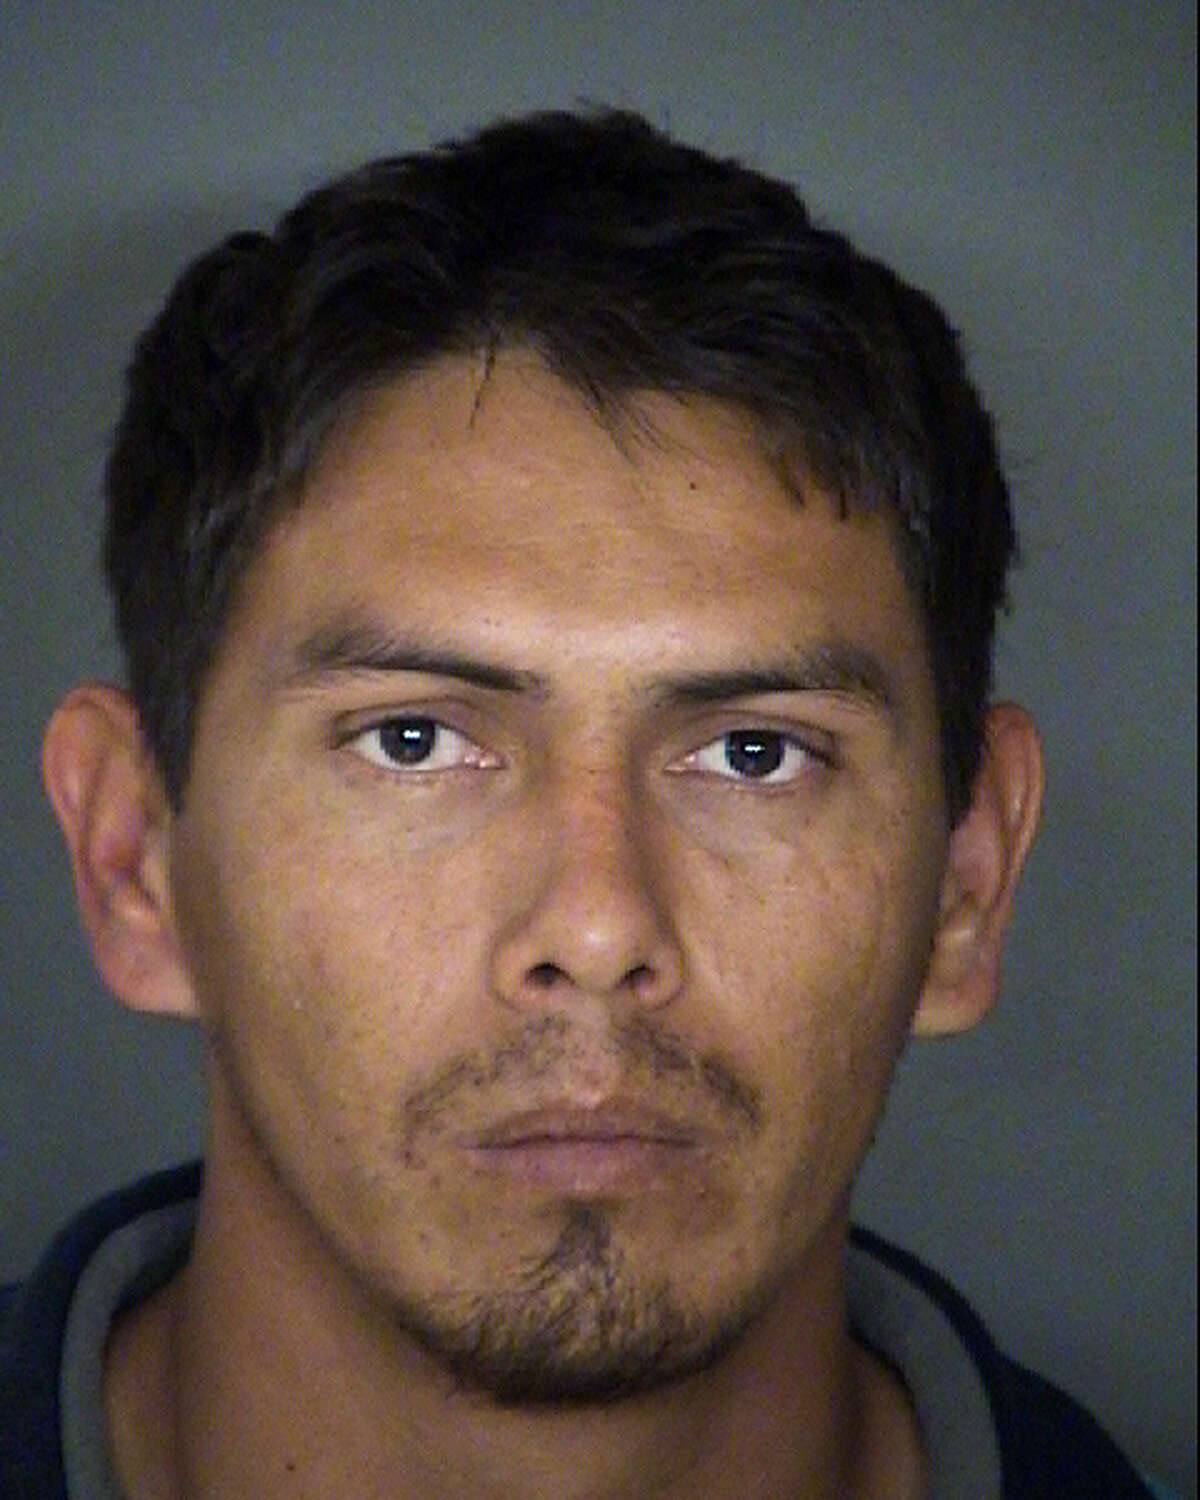 Jose Arturo Dominguez, 27, faces a charge of indecent contact with a child, a second-degree felony. He remains in the Bexar County Jail on a $75,000 bond.